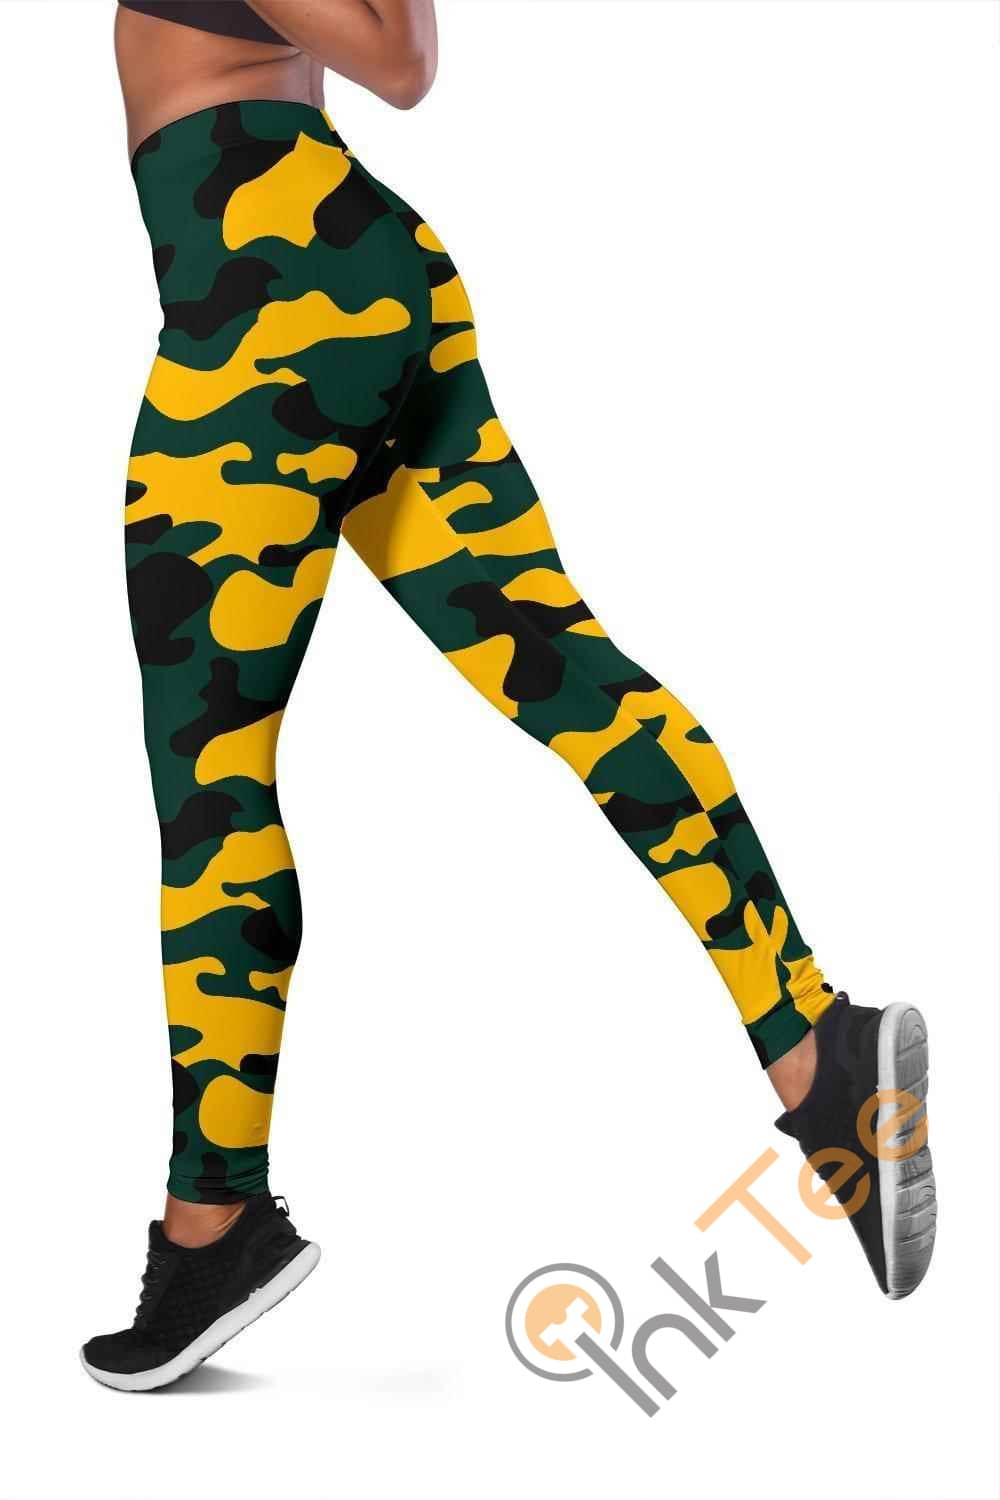 Inktee Store - Green Bay Packers Inspired Tru Camo 3D All Over Print For Yoga Fitness Fashion Women'S Leggings Image